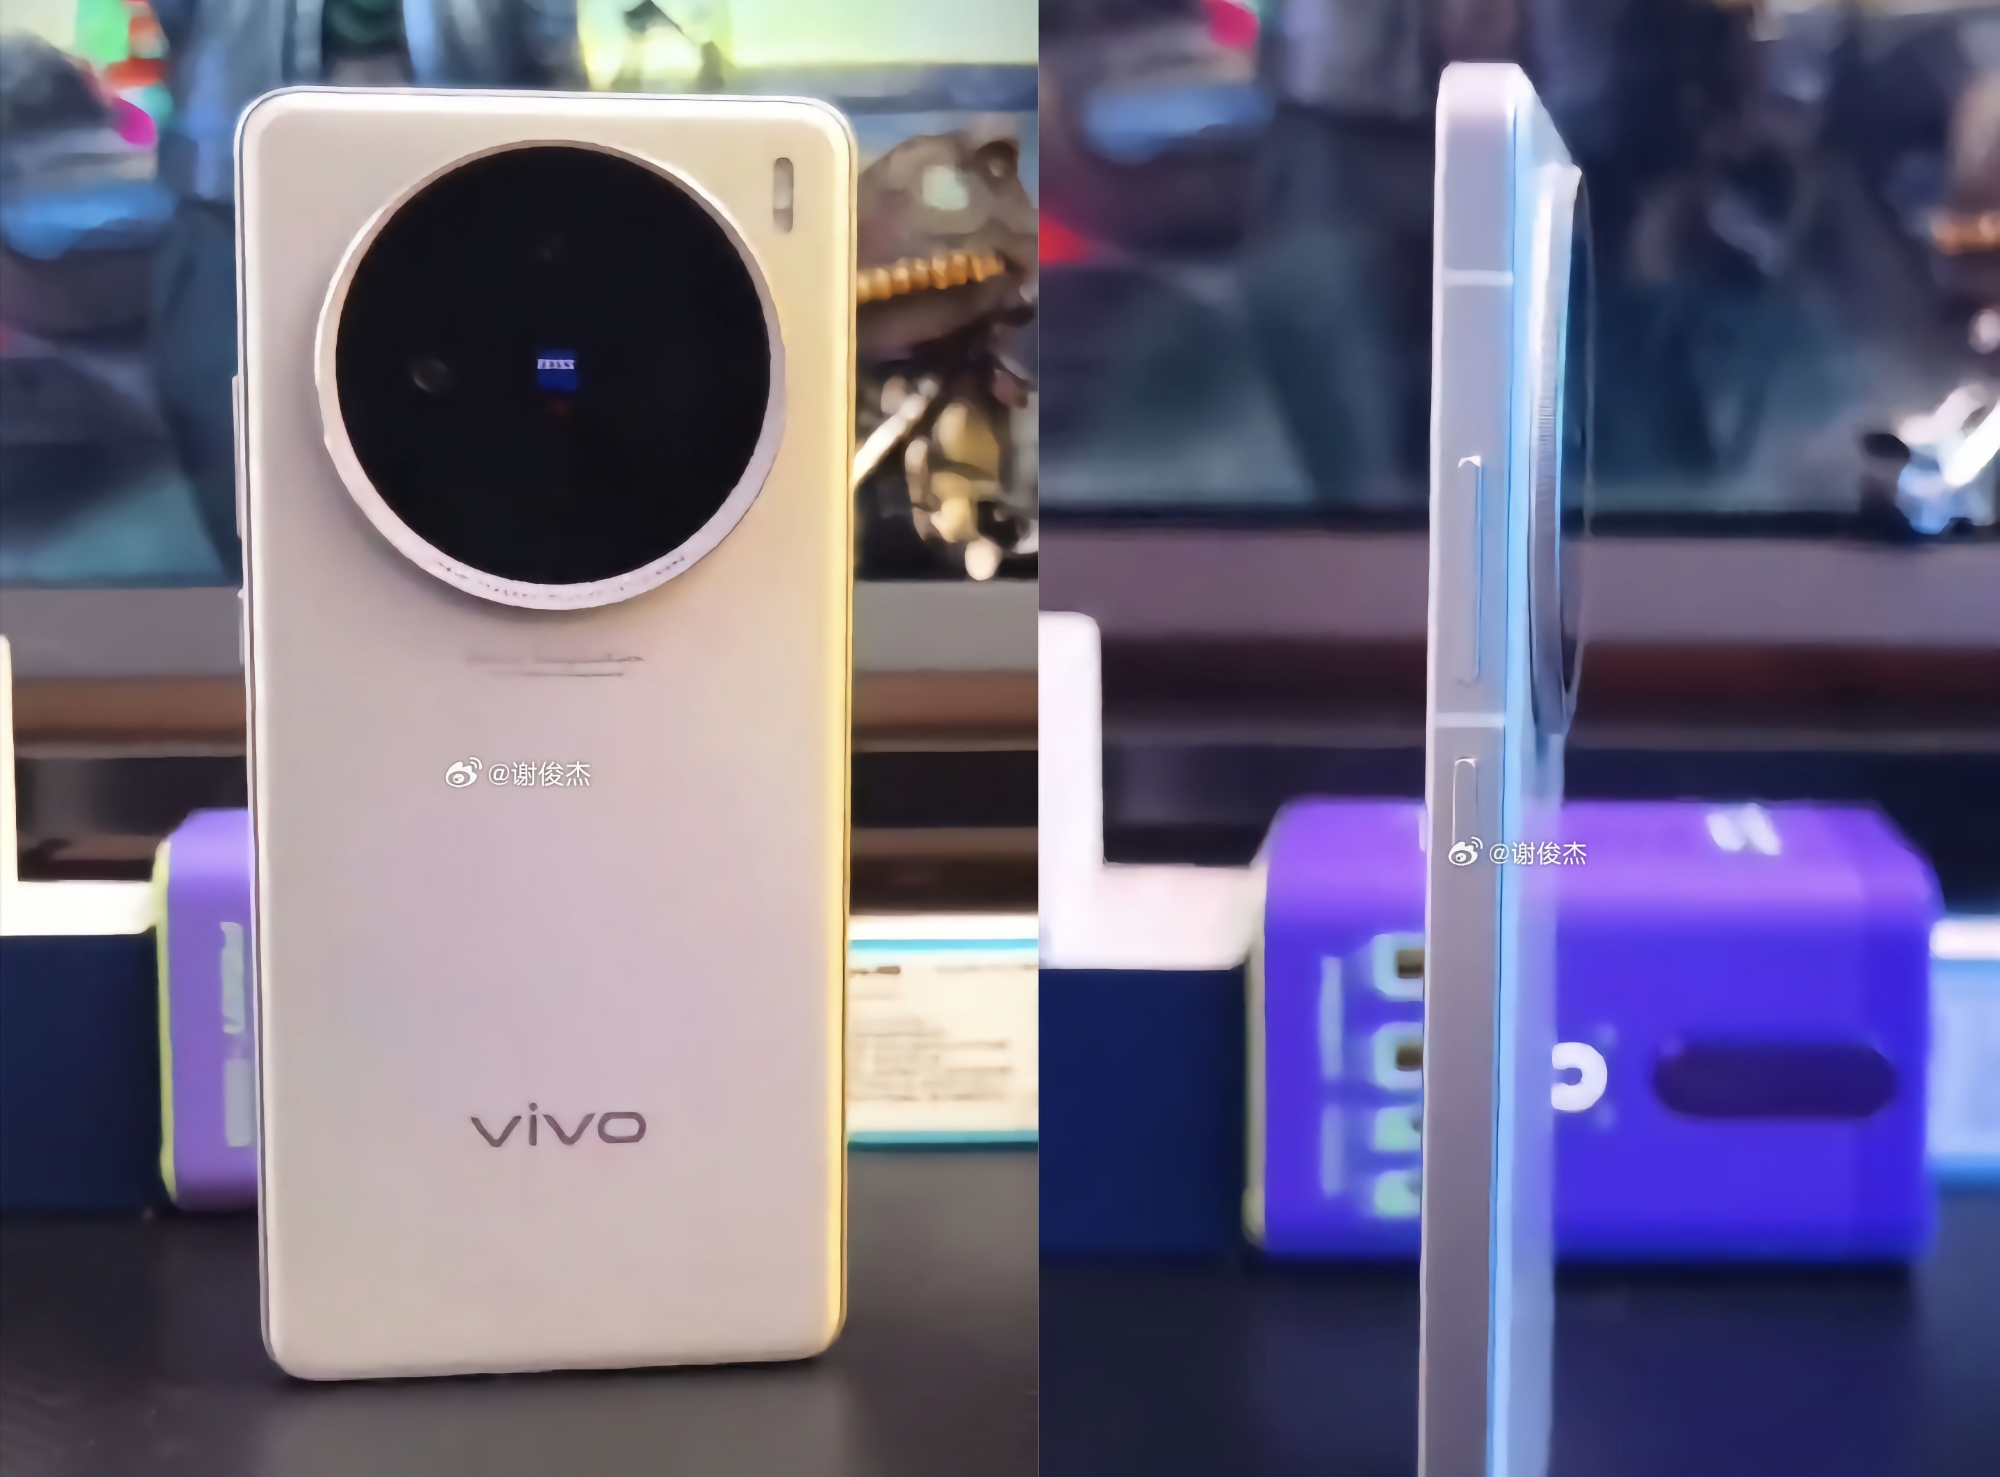 The vivo X100s flagship has surfaced in photos with a ZEISS camera and a flat body